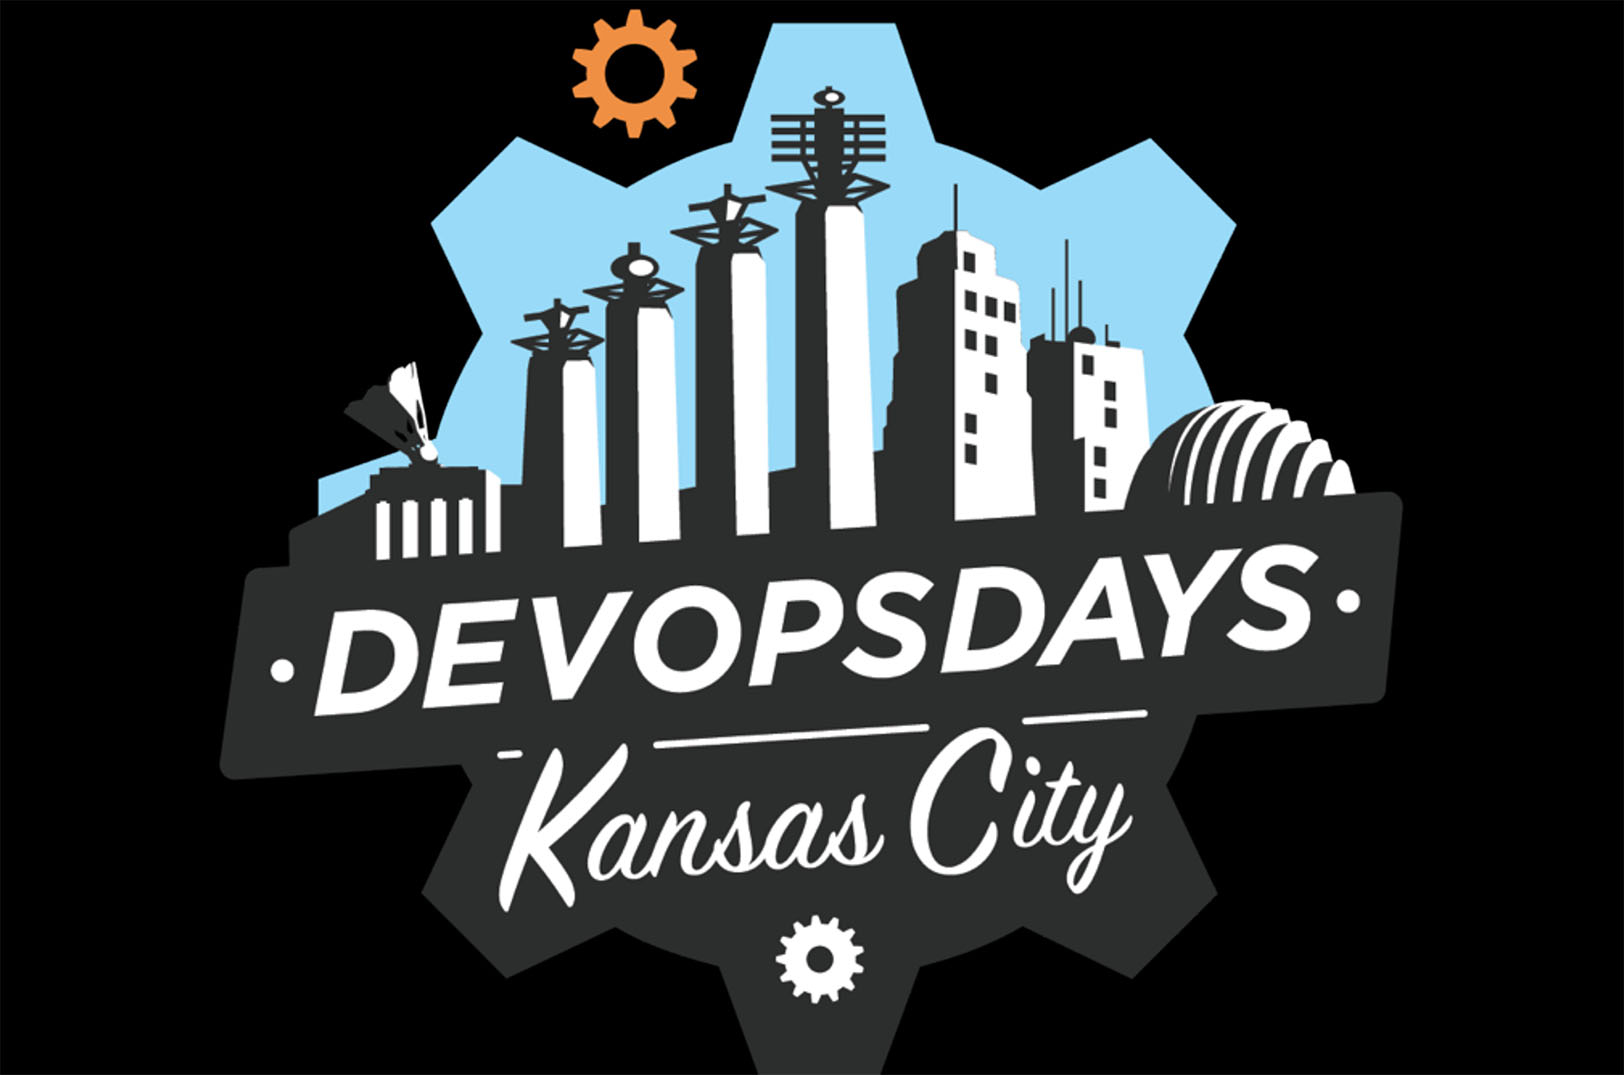 DevOpsDays brings two-day grassroots tech conference back to Kansas City